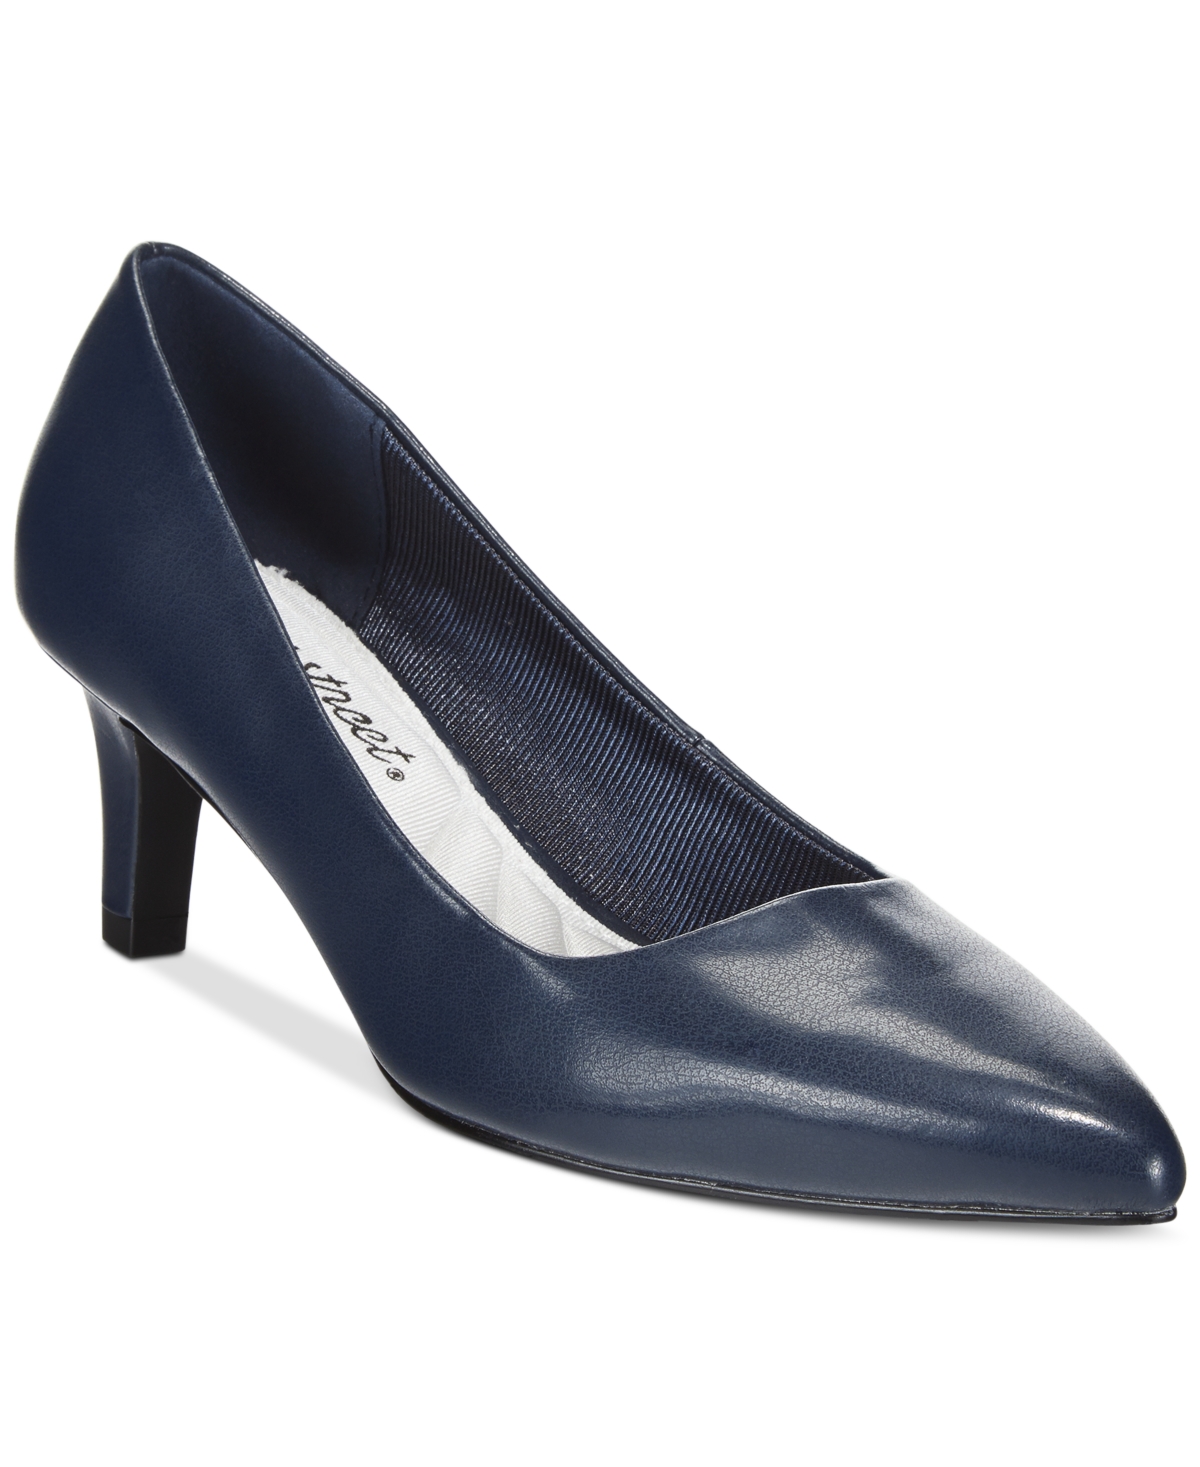 EASY STREET POINTE PUMPS WOMEN'S SHOES